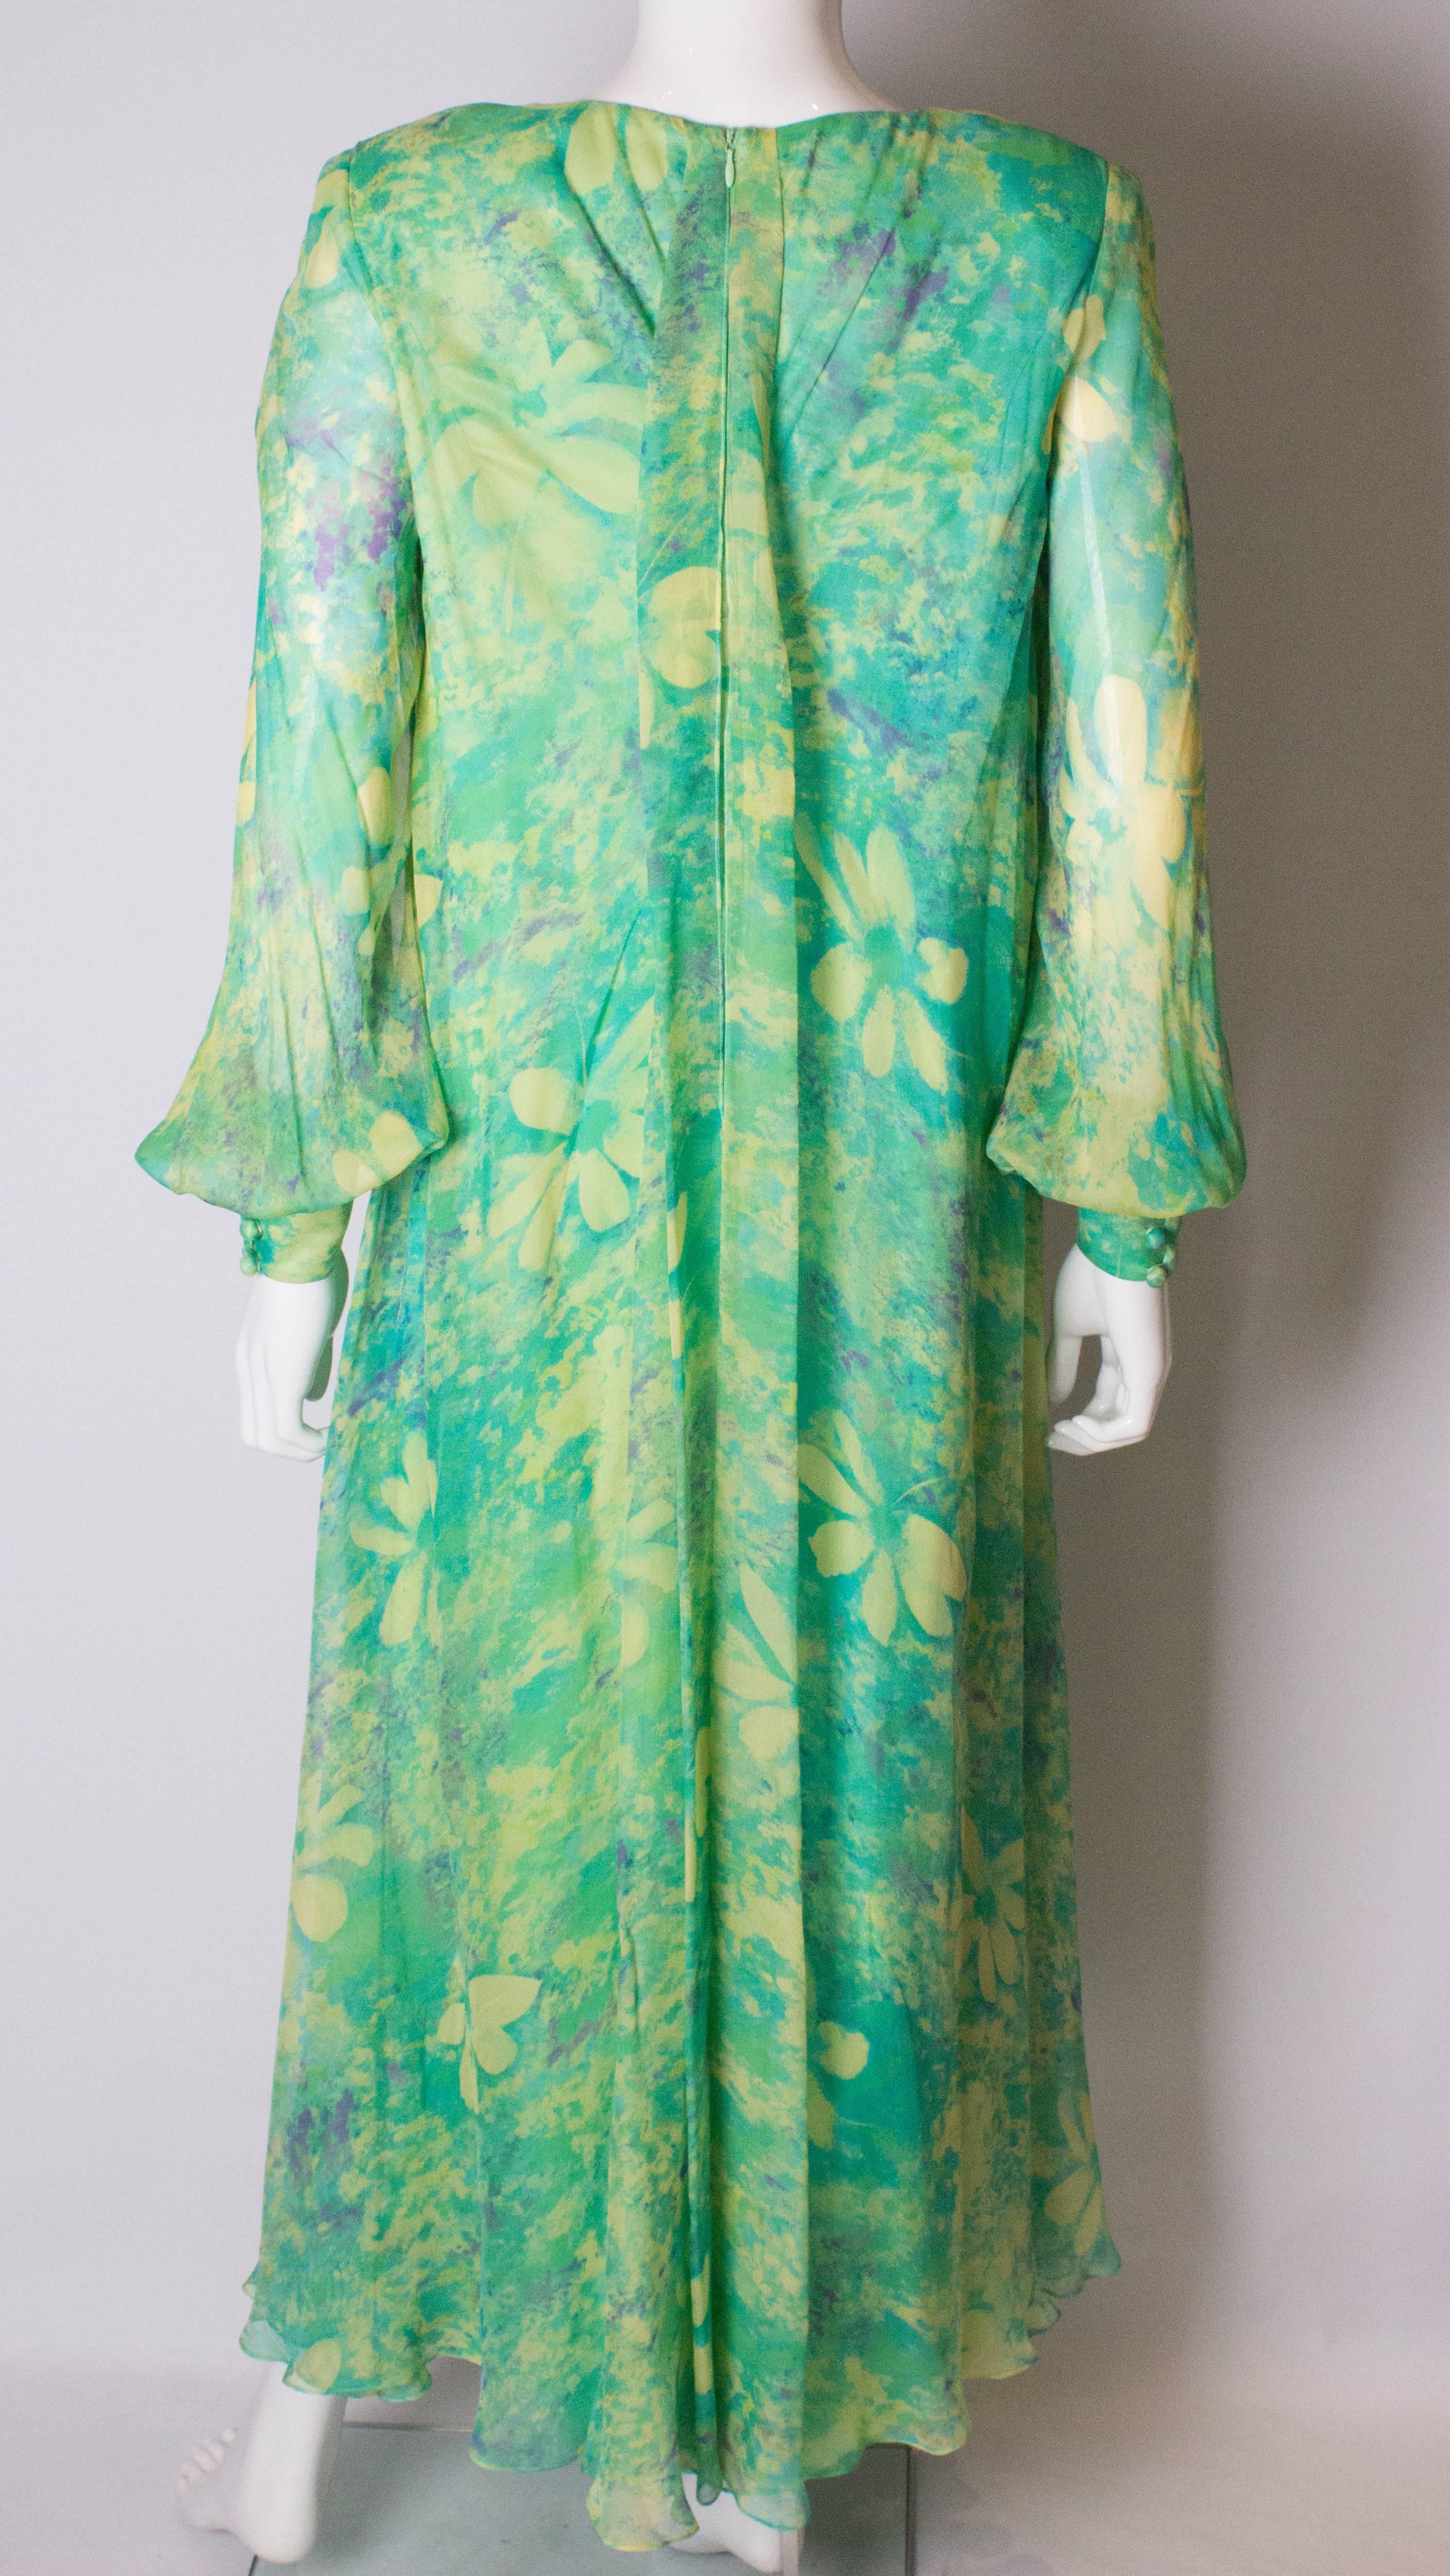 Vintage 1970s green floral print silk dress by Alison Rodger For Sale 1